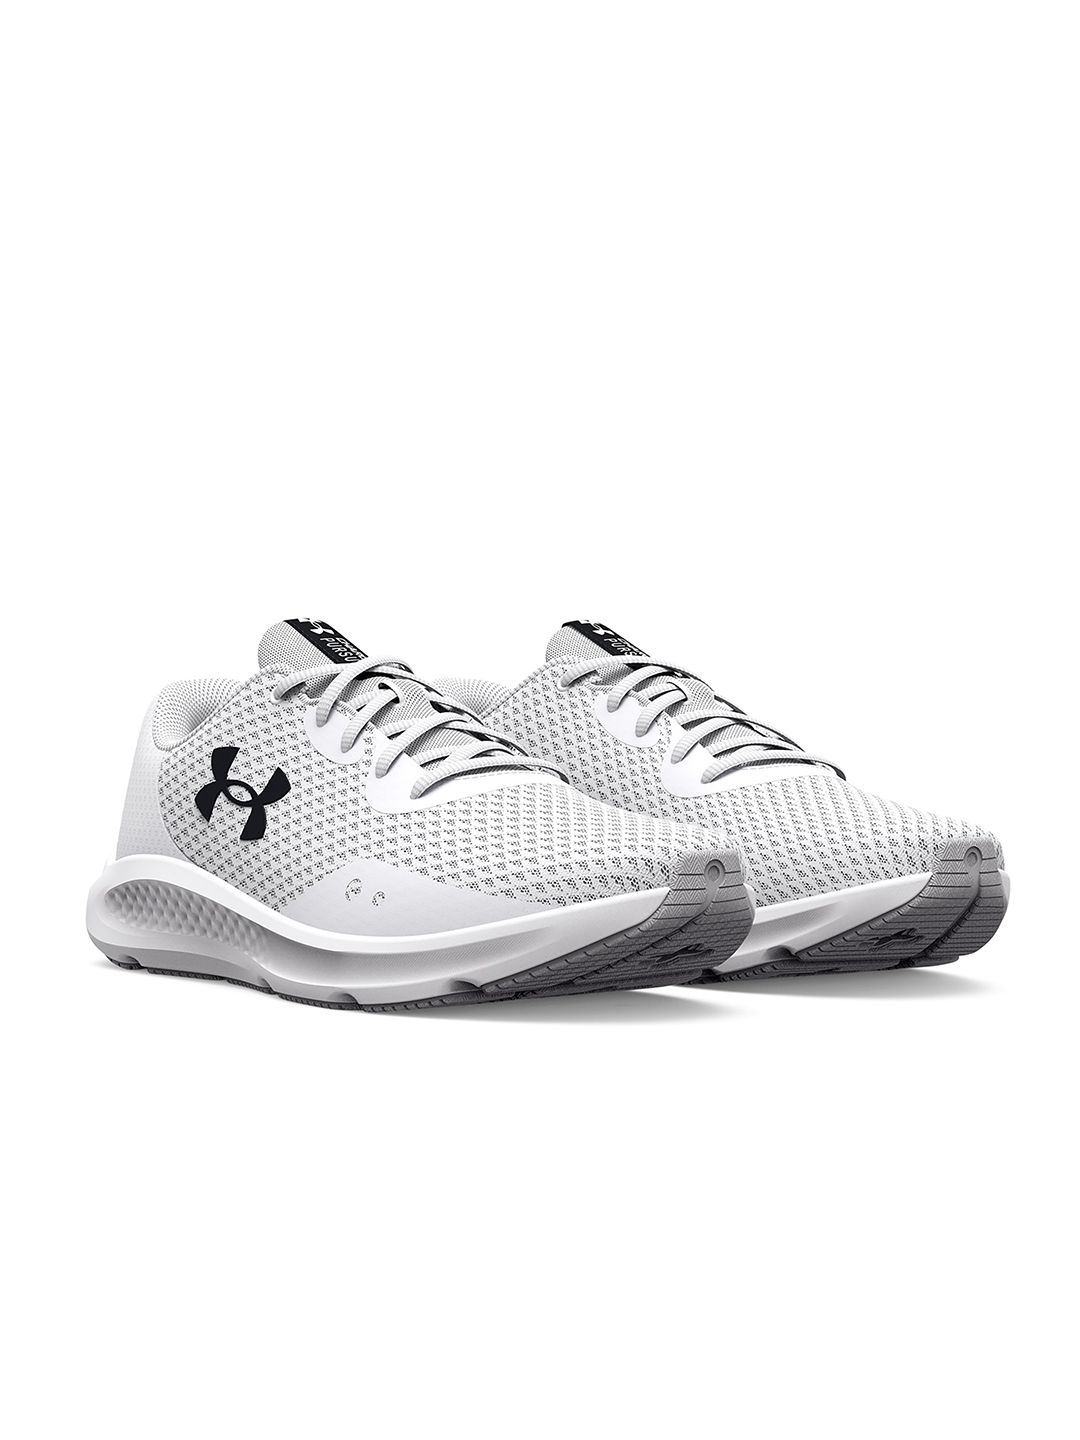 UNDER ARMOUR Women Off-White & Grey Woven Design Charged Pursuit 3 Running Shoes Price in India